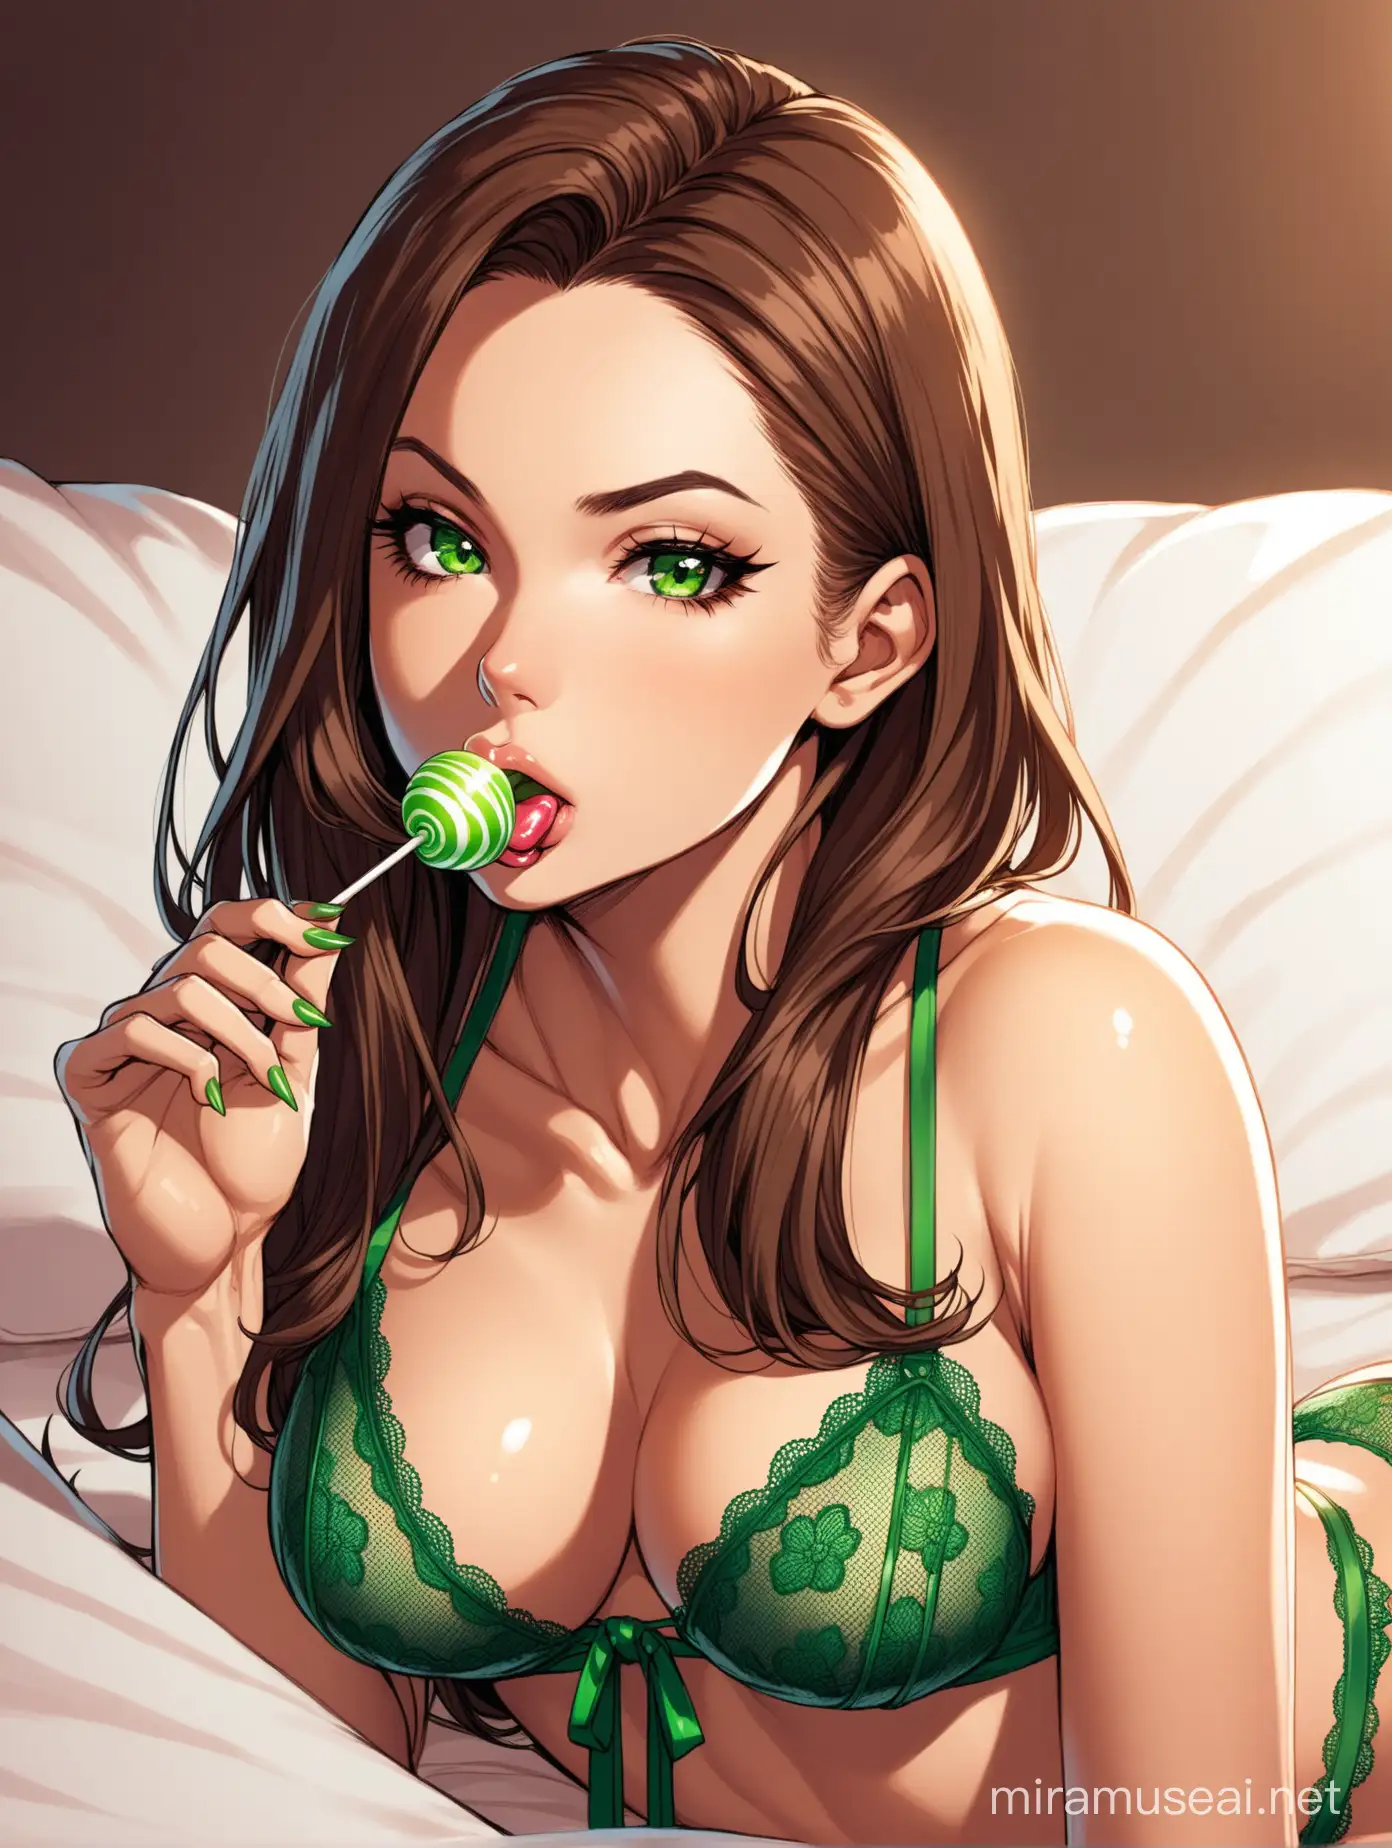 Rogue (from X-men) laying in bed, wearing a green lace lingerie, her BROWN HAIR with WHITE STREAKS is half up, tied with a green ribbon, she is licking a lollipop, seductive expression 